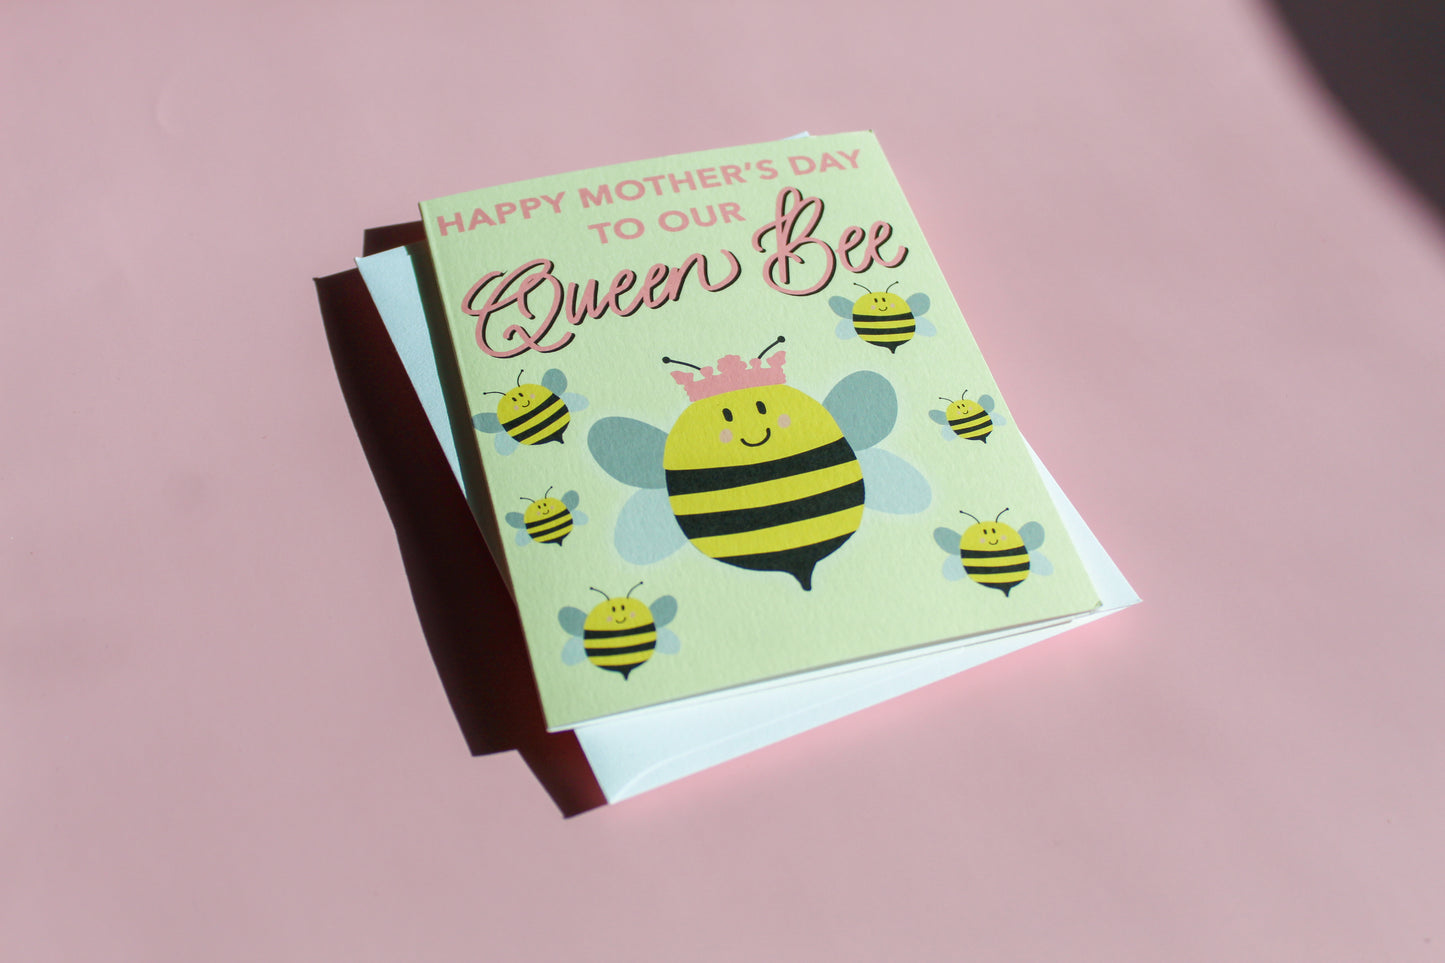 Happy Mother's Day to our Queen Bee Greeting Card